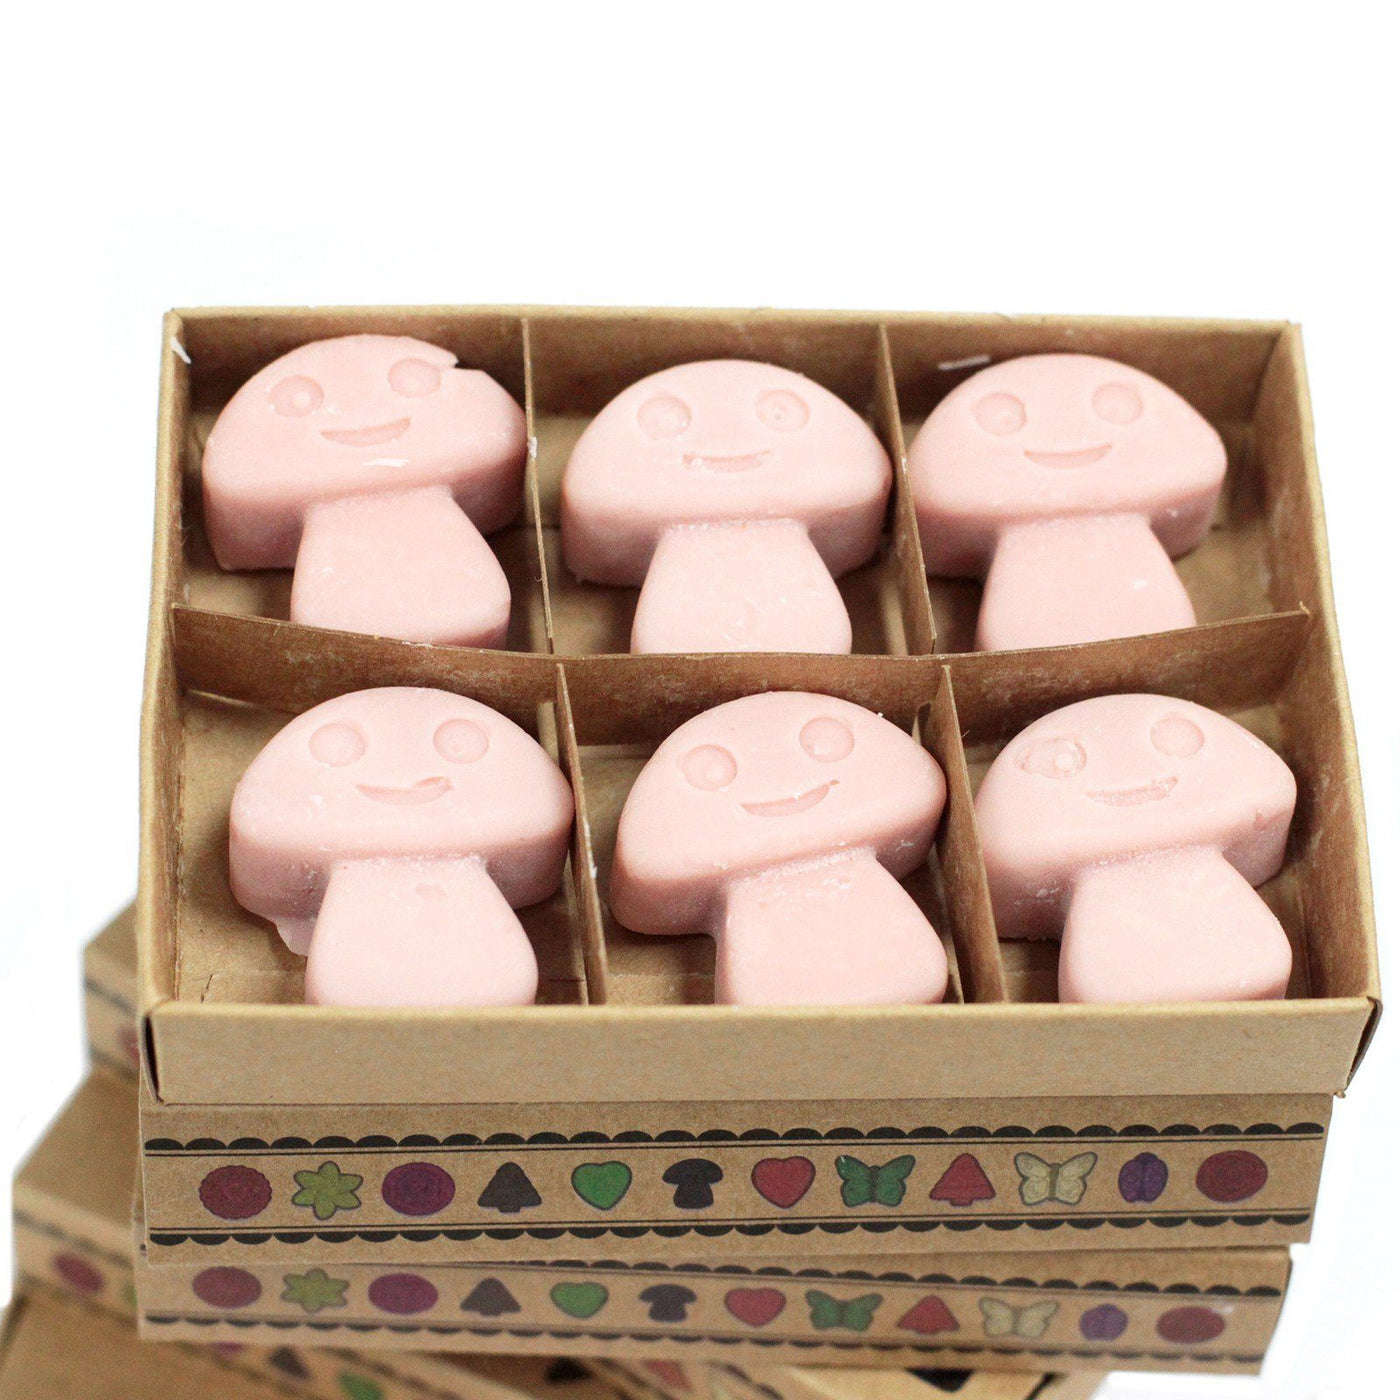 Box of 6 Toadstool Shaped Fragrance Soy Wax Melts - Coffee Trader.